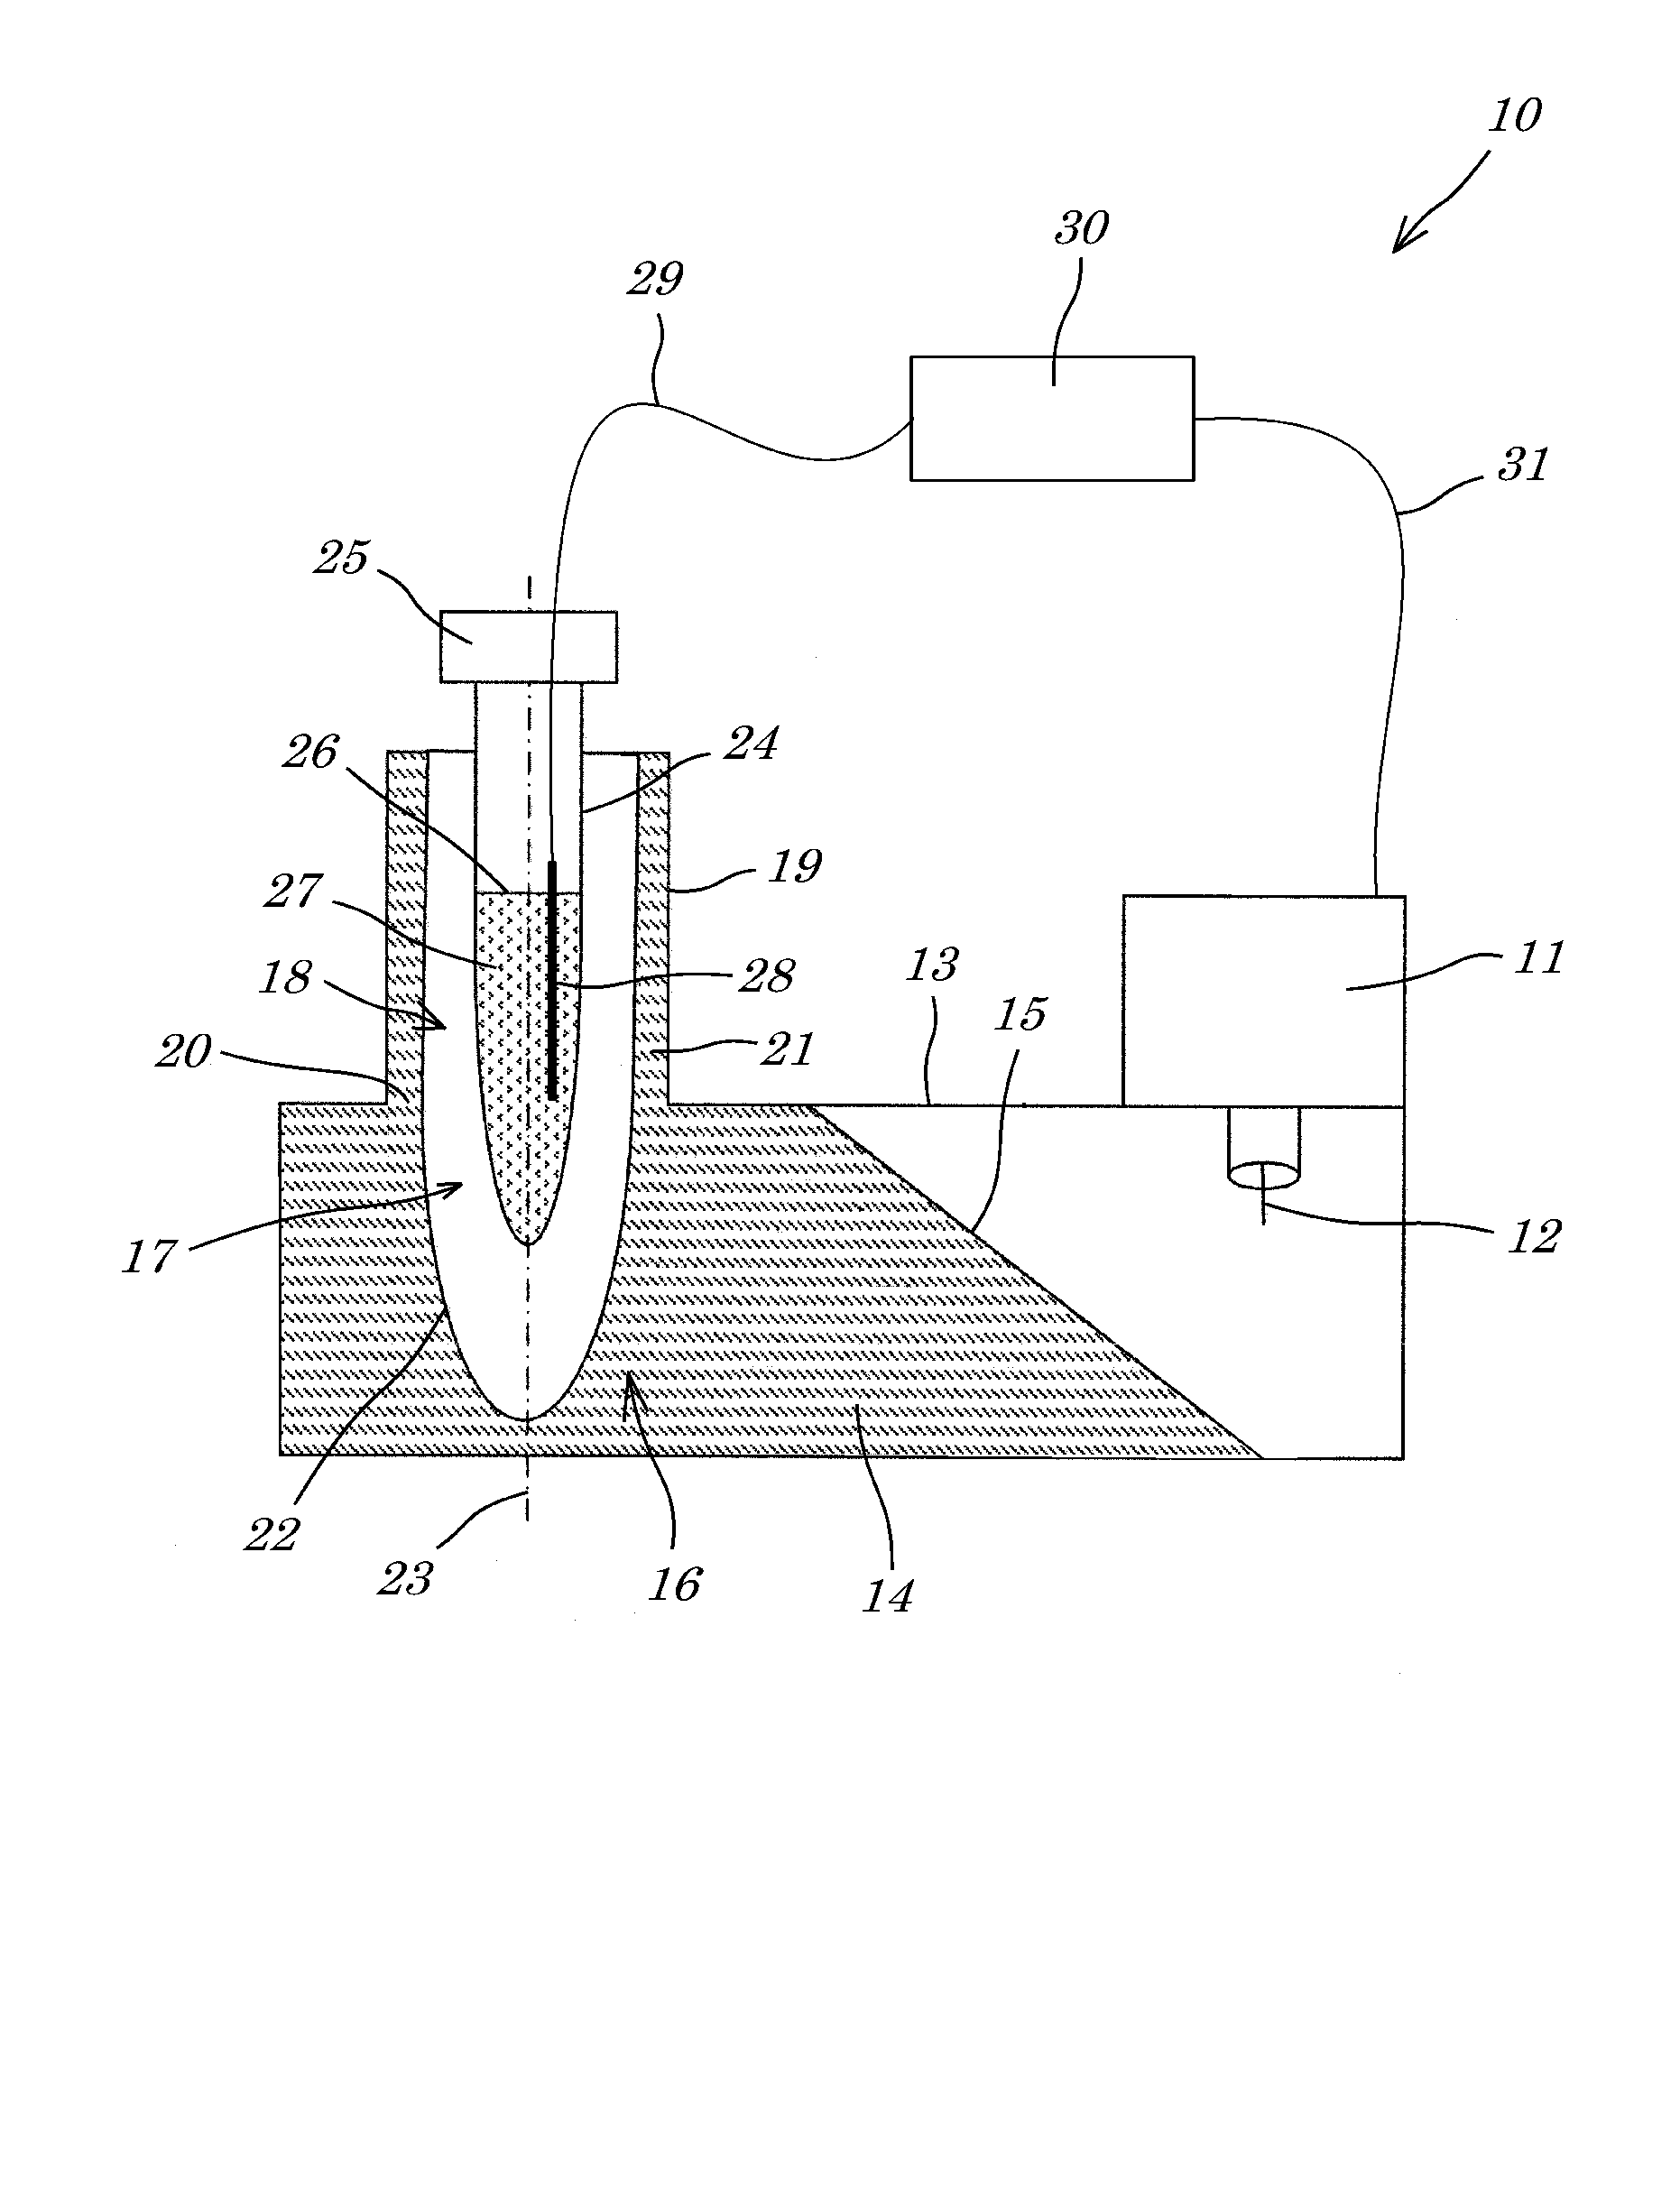 Device for heating a sample by microwave radiation